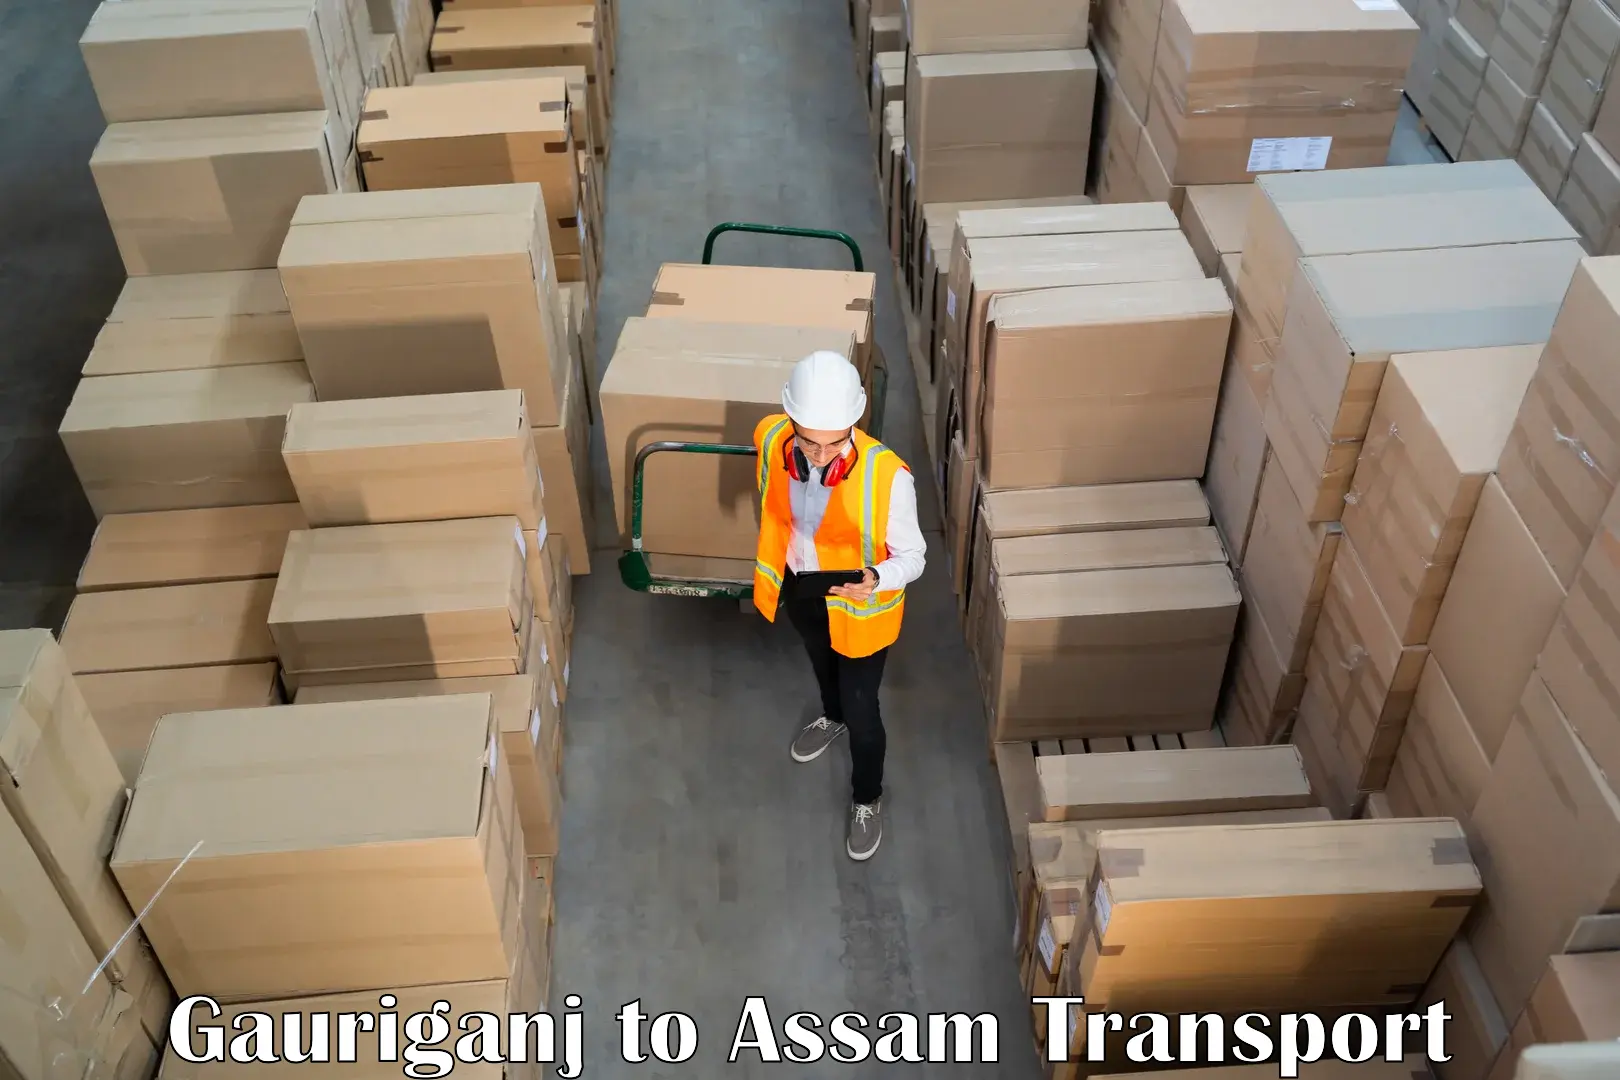 Air freight transport services Gauriganj to Udharbond